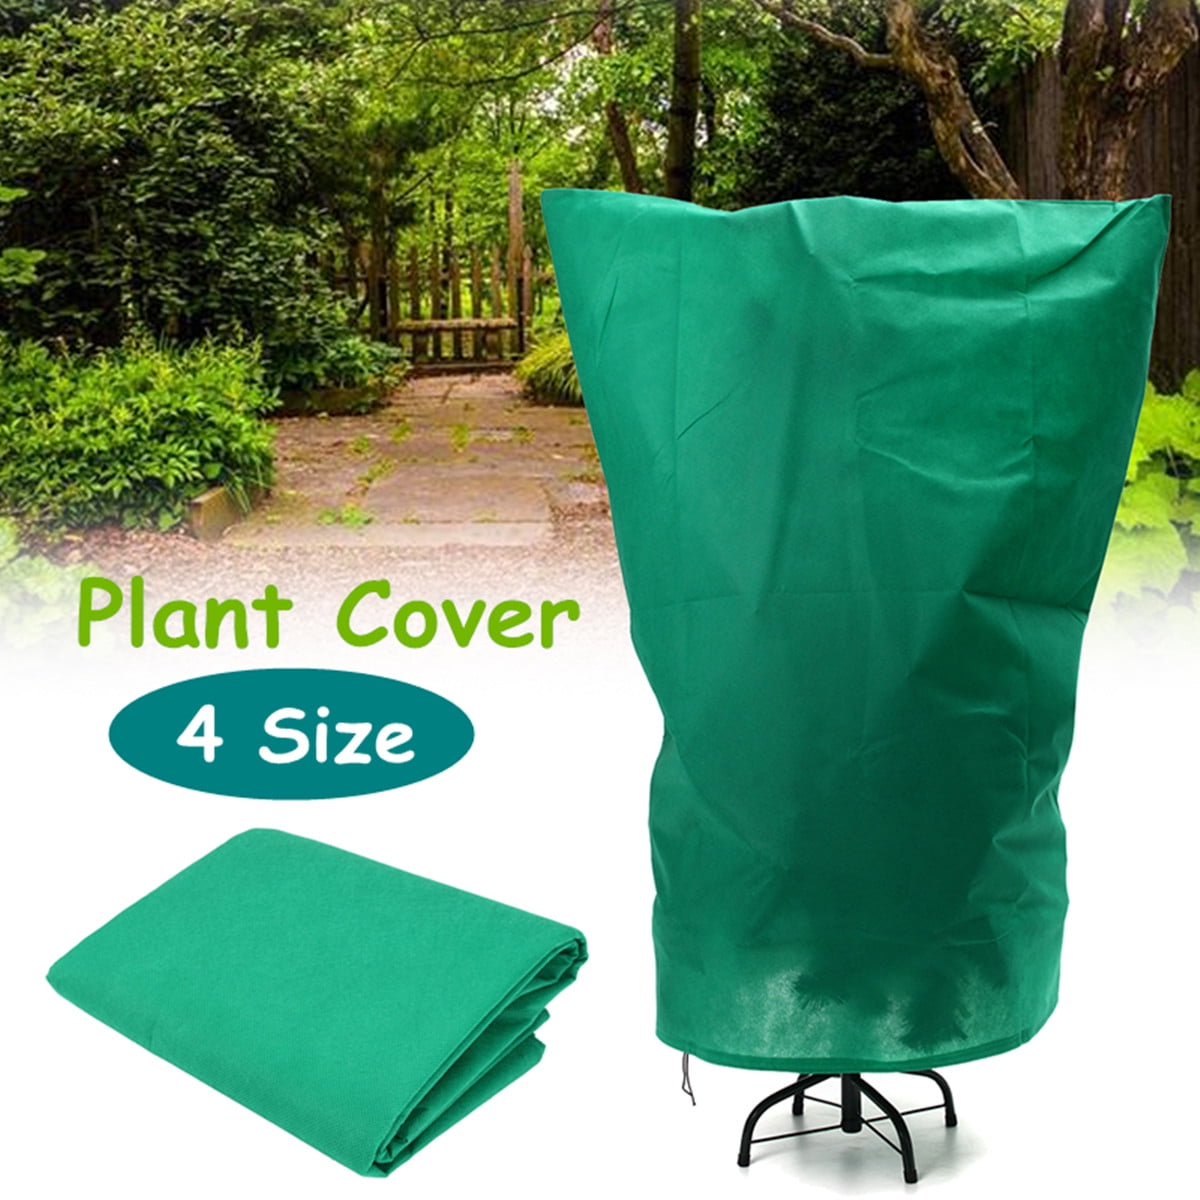 4 Size Green Warm Plant Cover Tree Shrub Frost Protection Bag Yard Garden Winter 